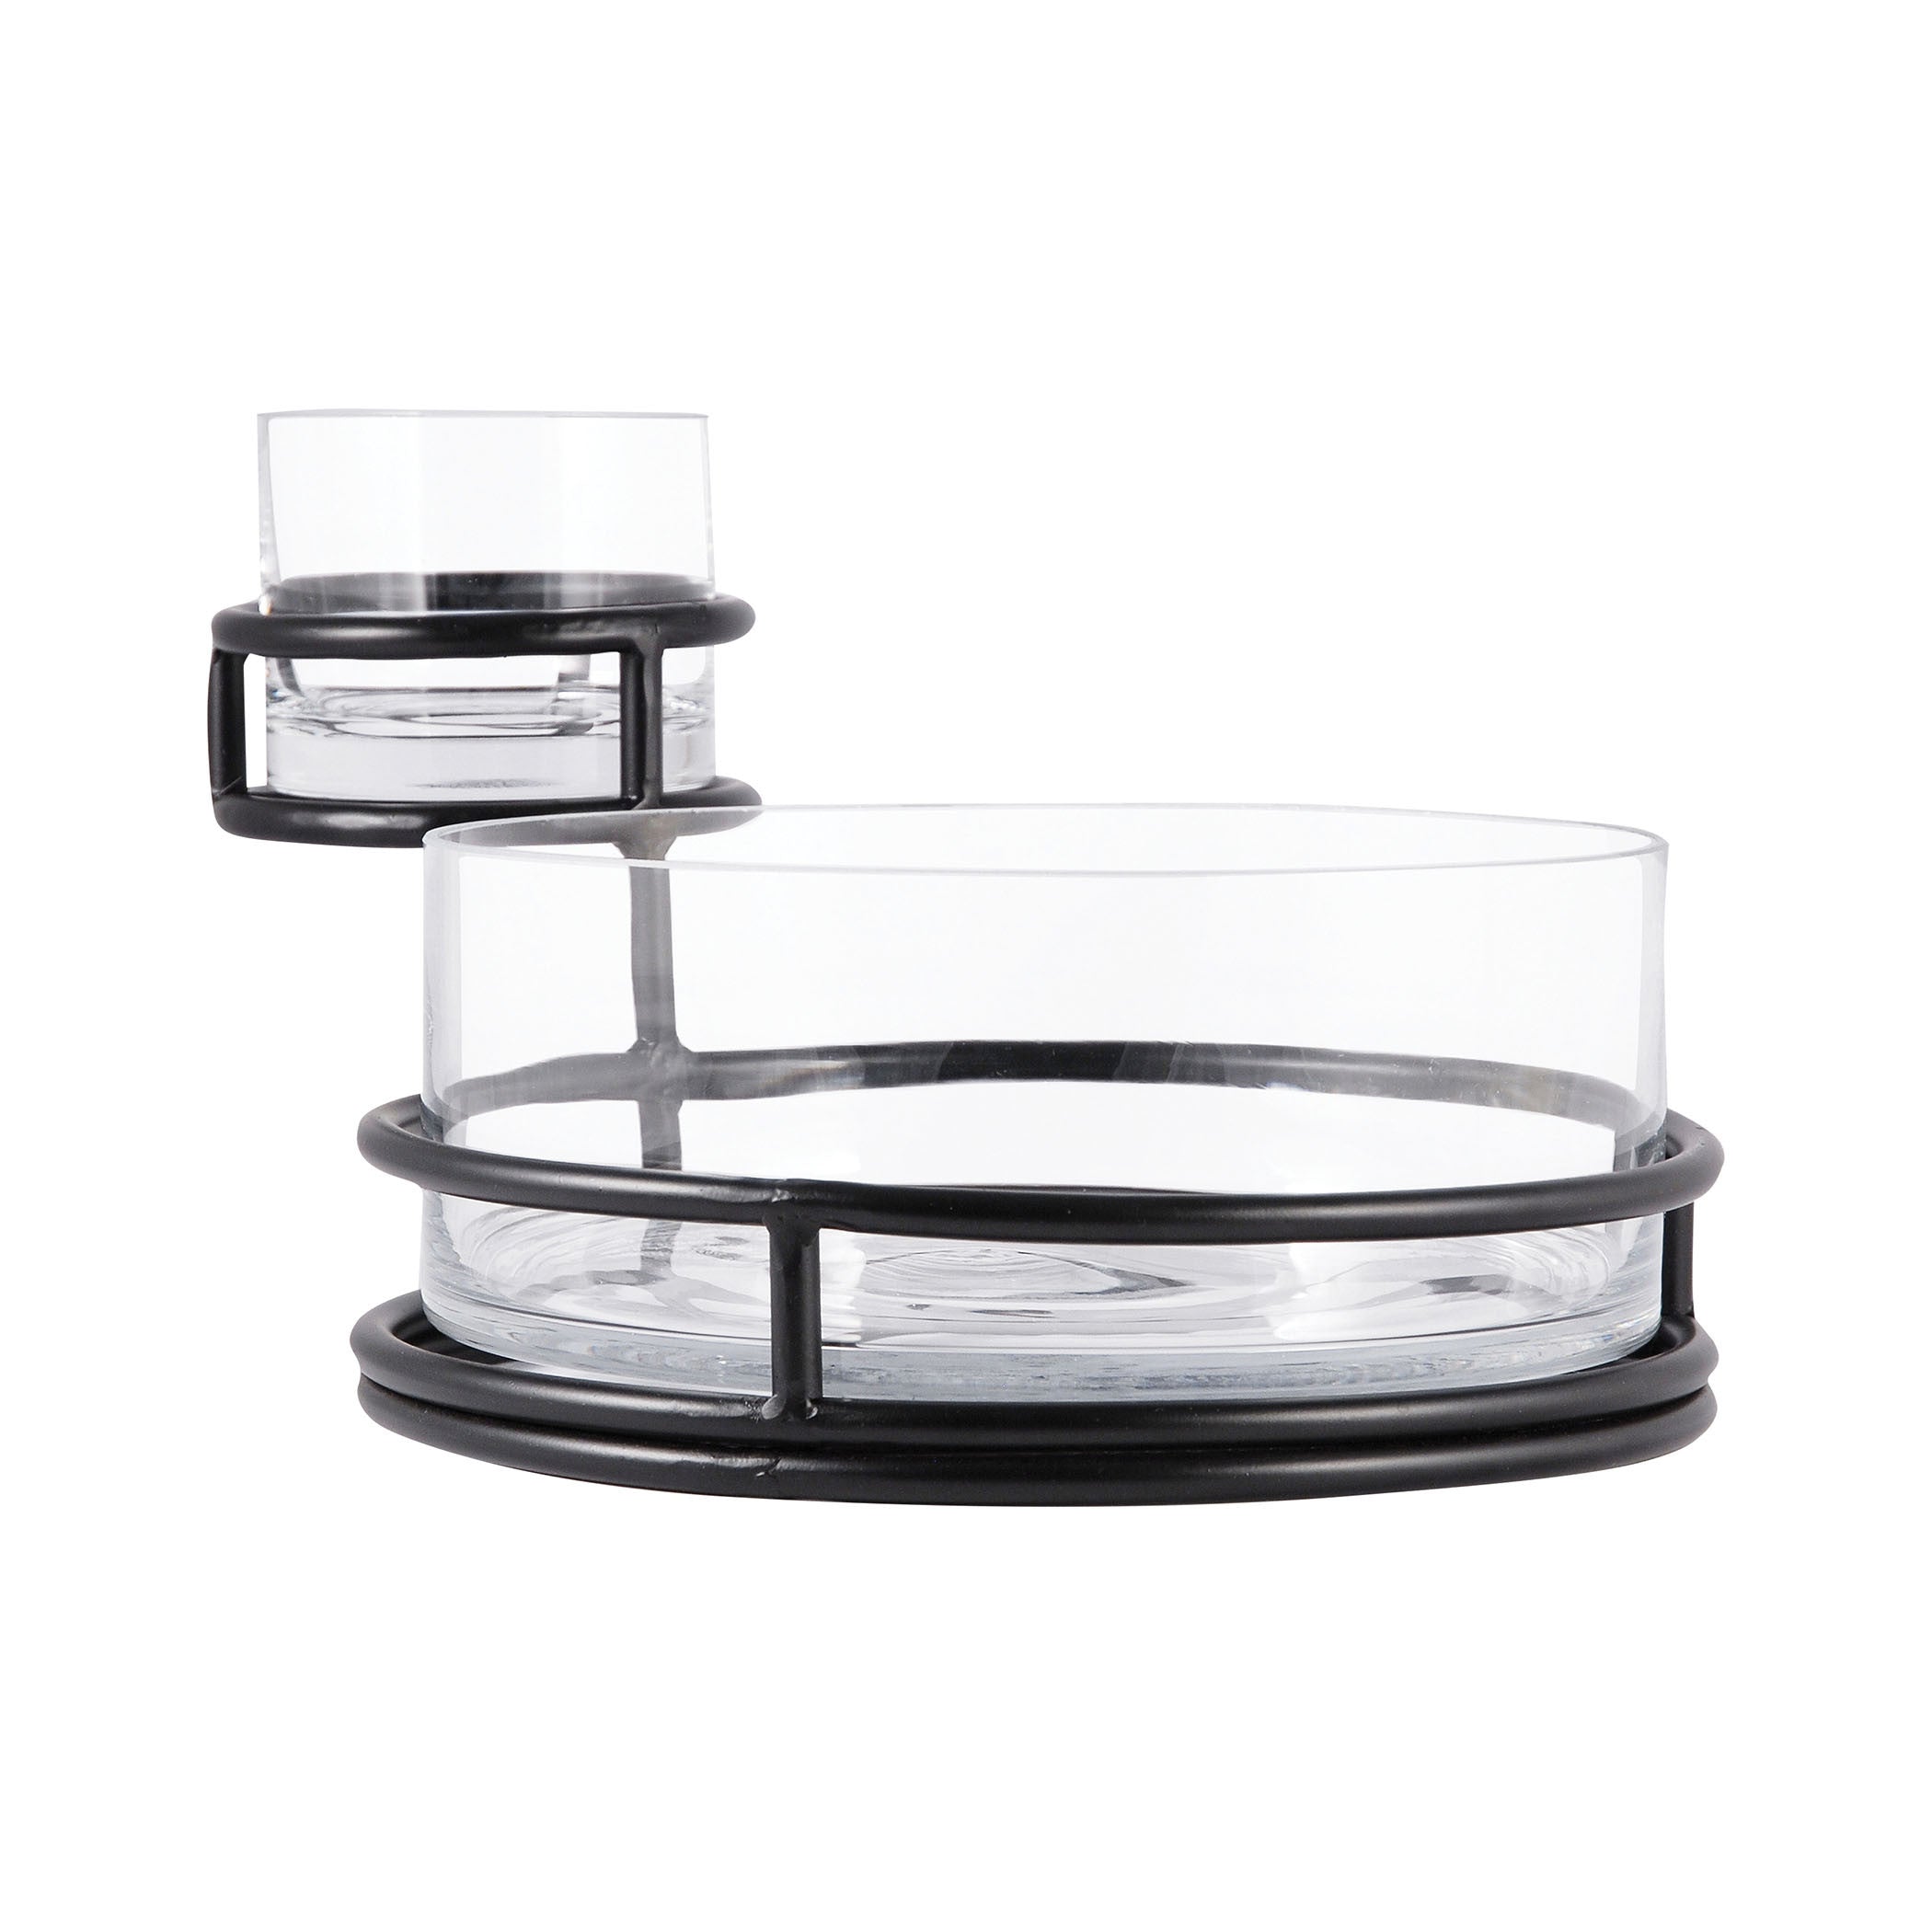 Pomeroy Pom-608520 Stanton Collection Black,clear Finish Tray